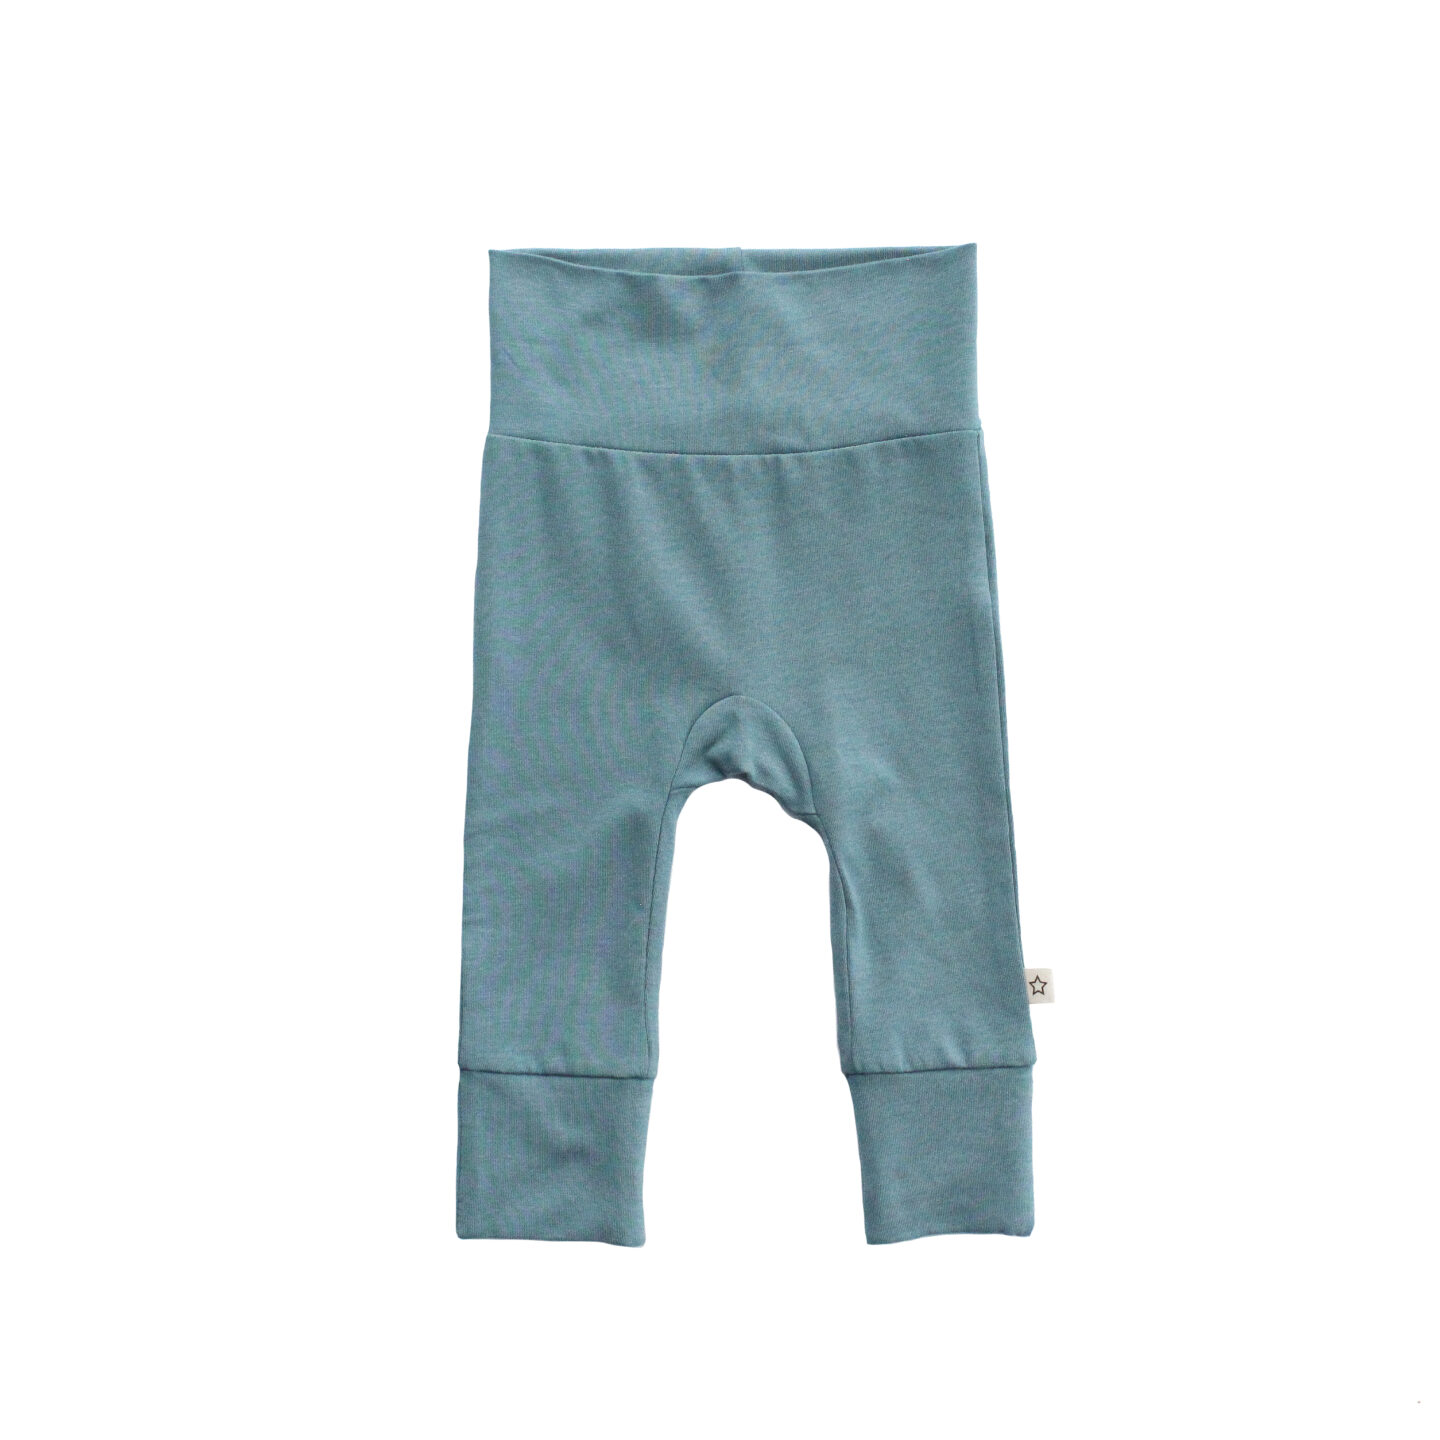 Your wishes broek Nesse smoke blue